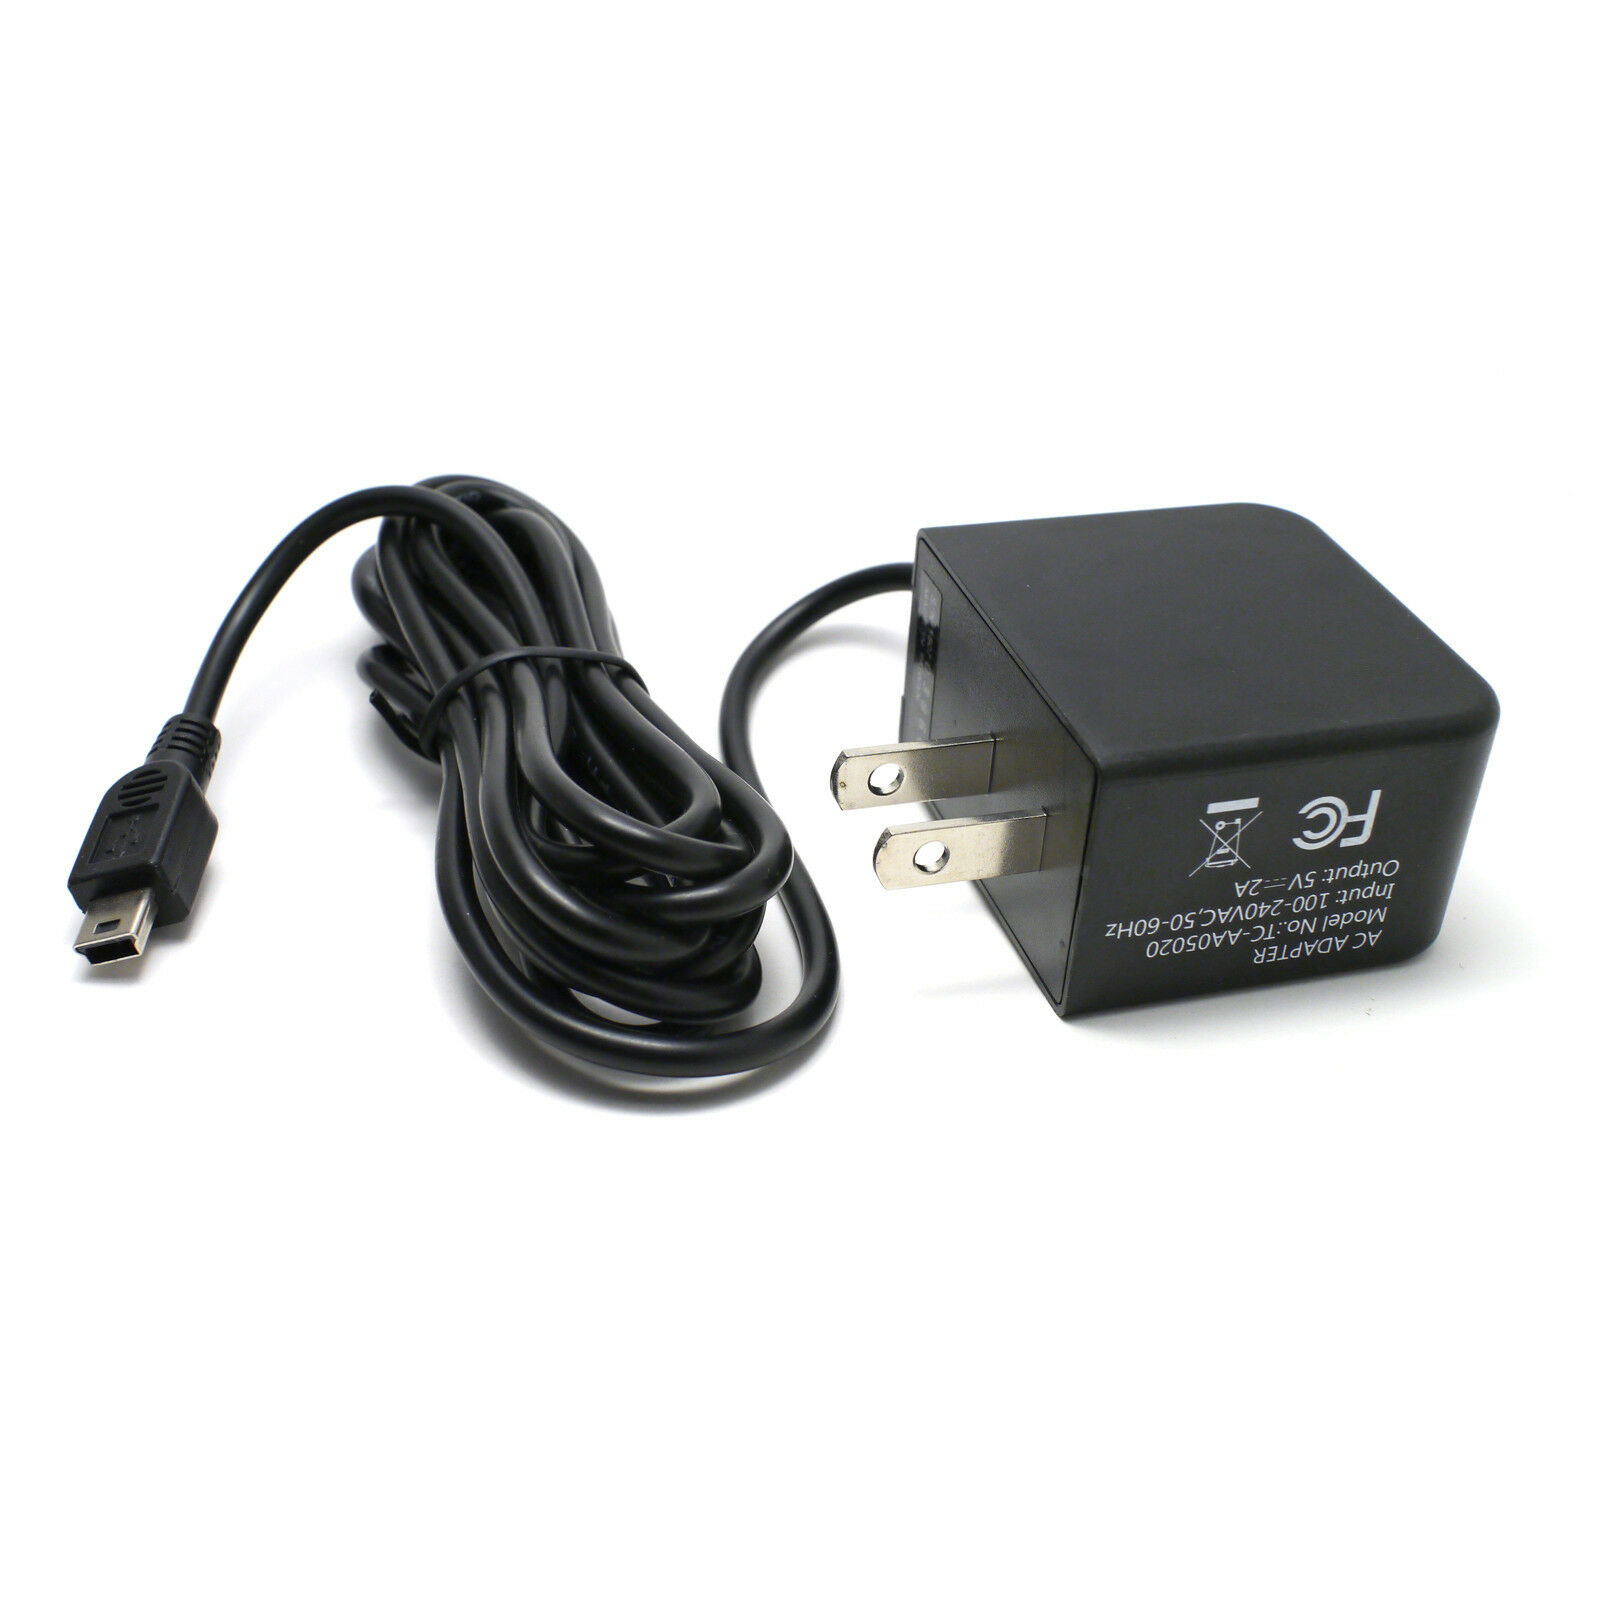 Wall charger power cord for Garmin Drive DriveSmart 50 lmthd Dezl 570lmt 580 GPS Country/Region of Manufacture: Taiwan - Click Image to Close